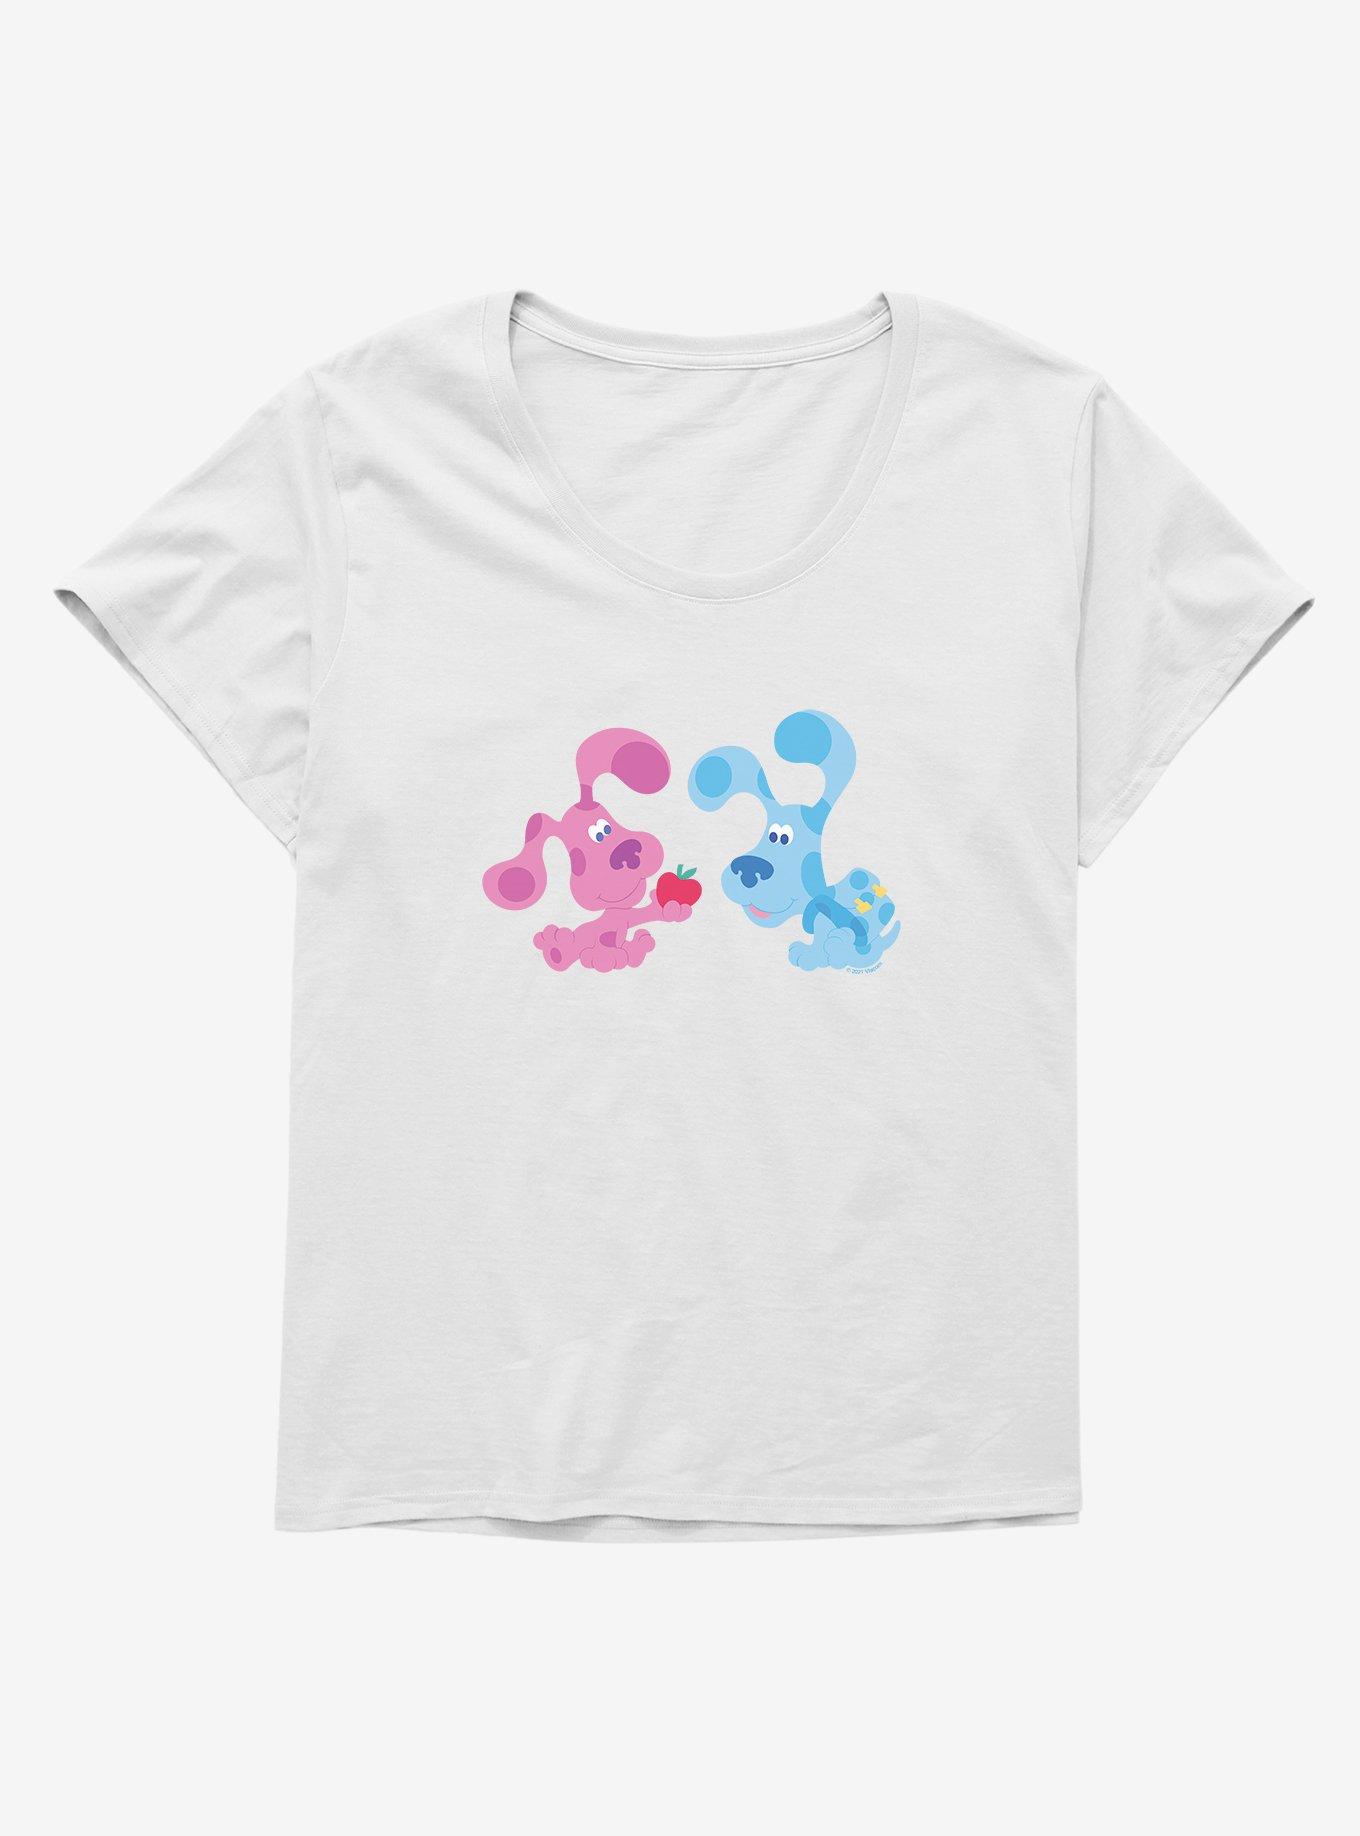 Blue's Clues Magenta And Blue Apple Girls T-Shirt Plus